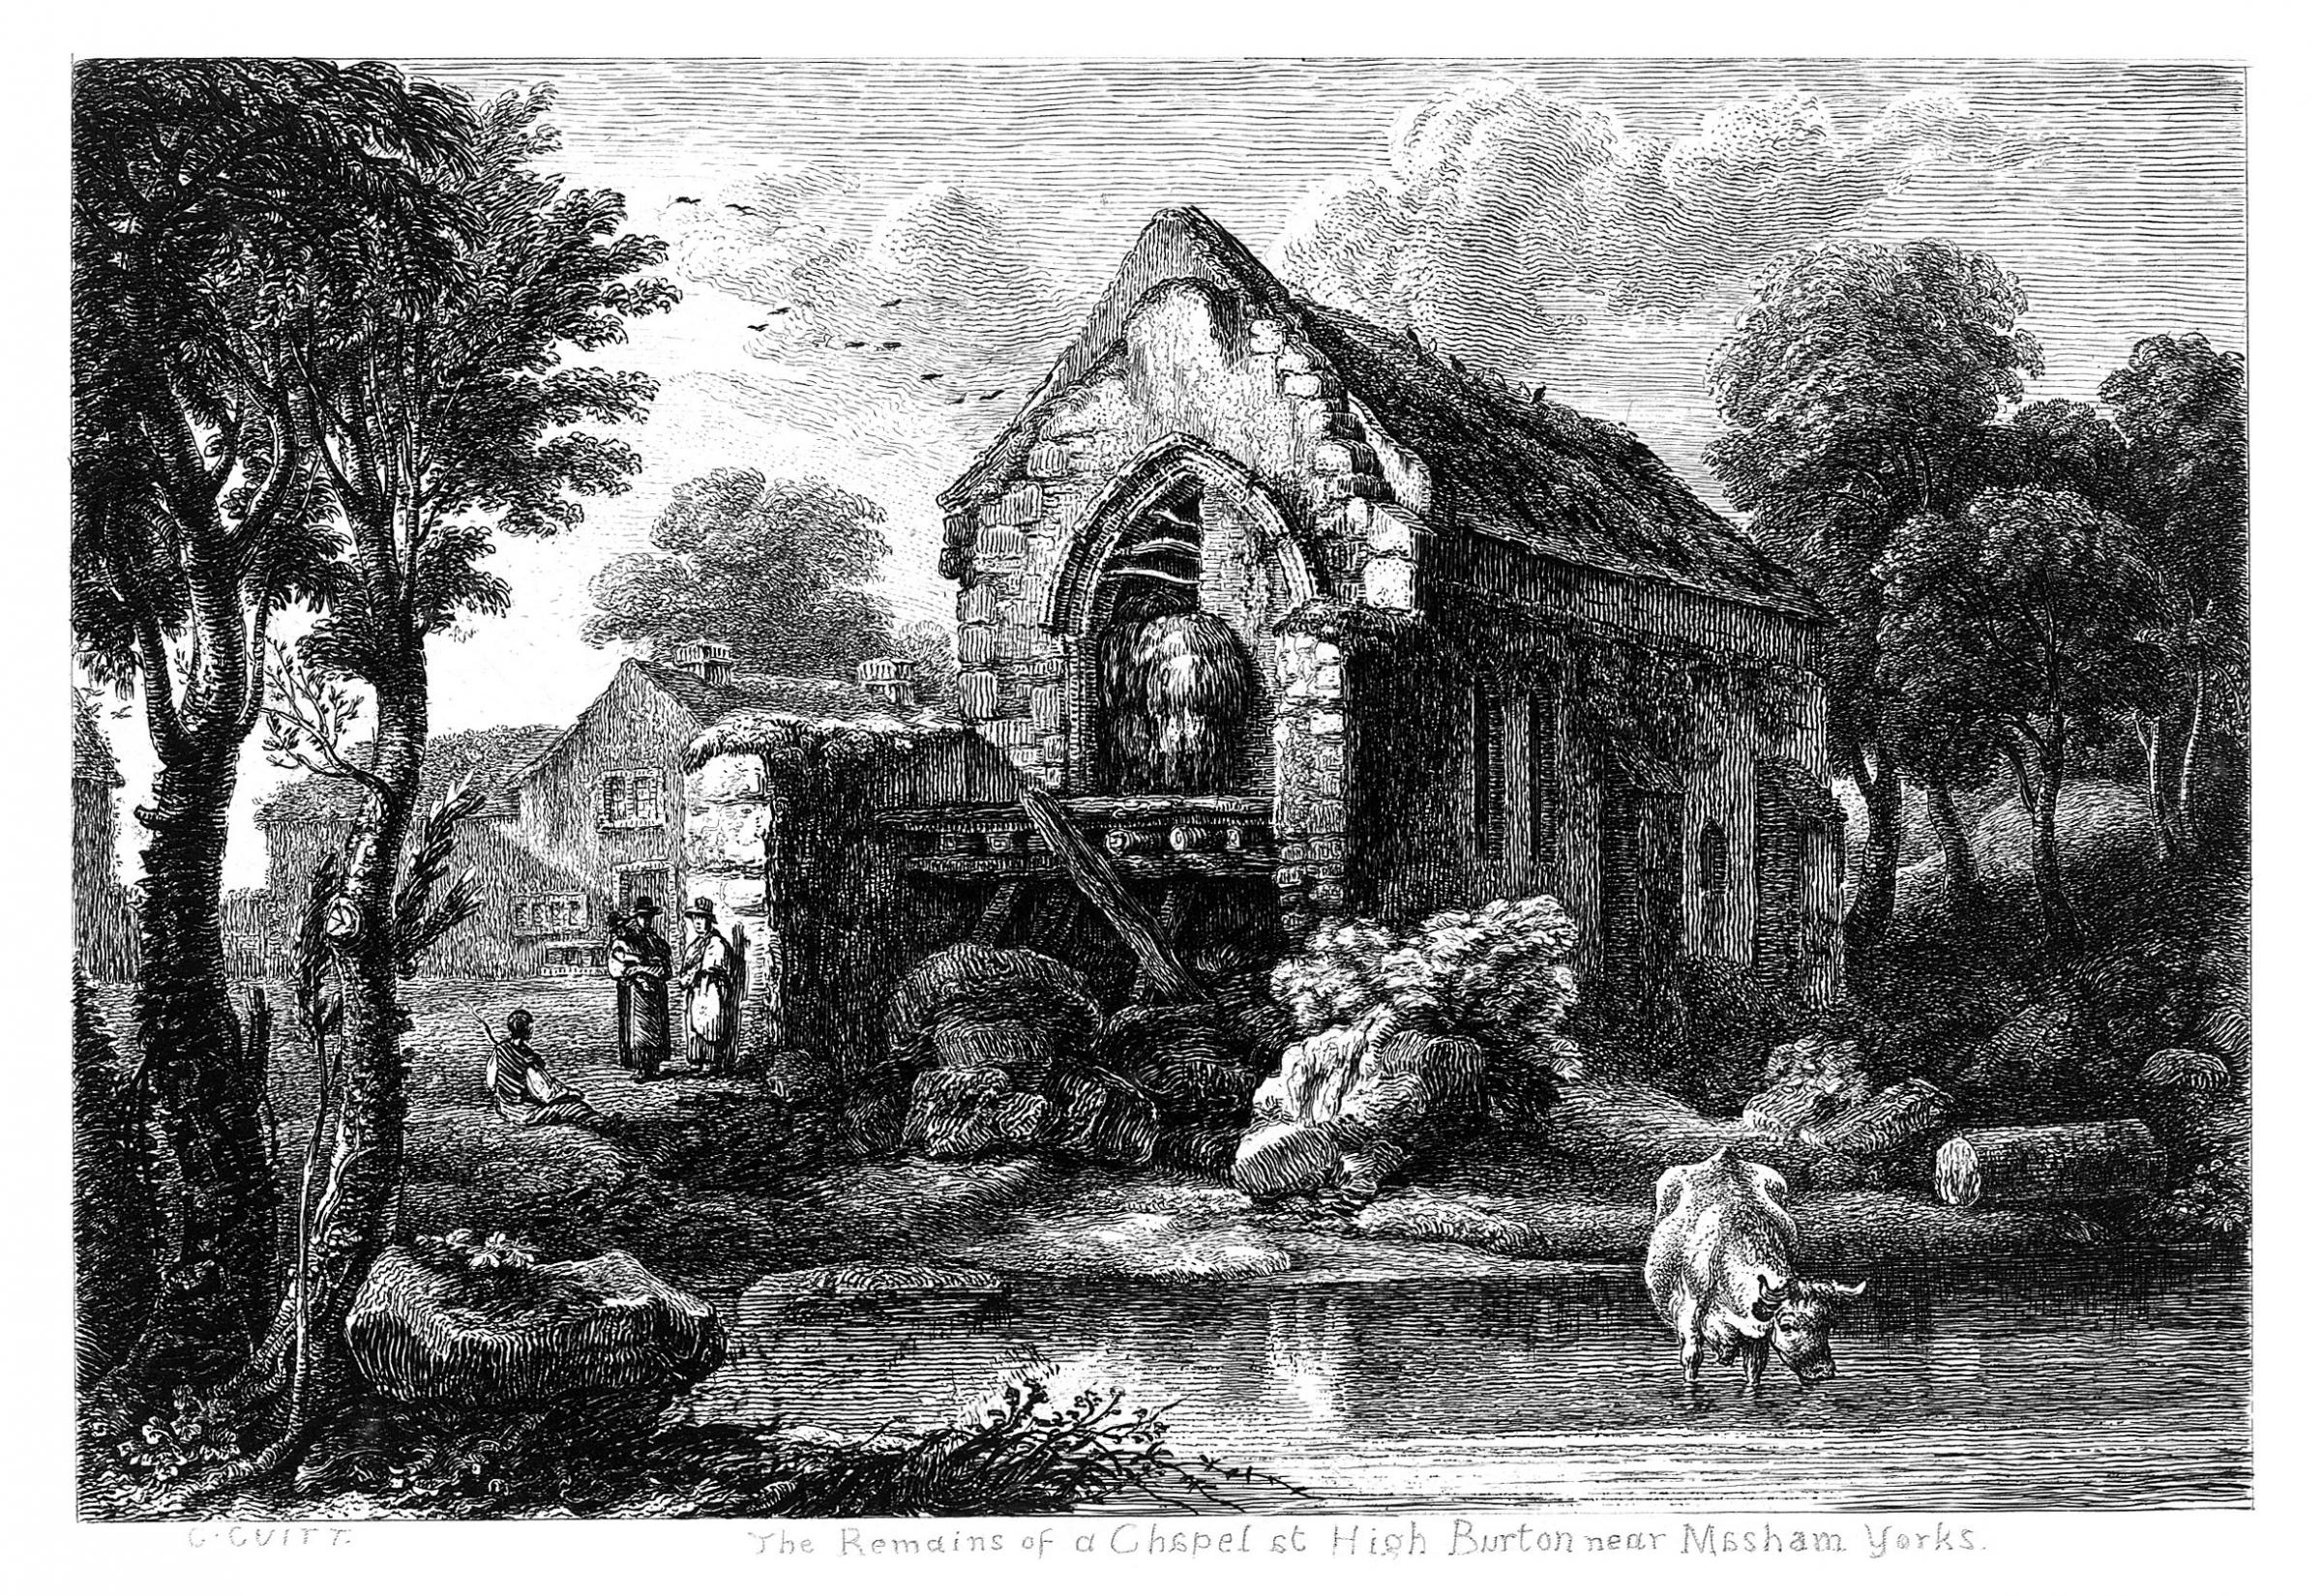 The Remains of a Chapel at High Burton near Masham Yorks, by 1827. The only known view of a chapel which had been part of the Wyvil familys estate (Bree 2.79, Cheshire Archives and Local Studies)